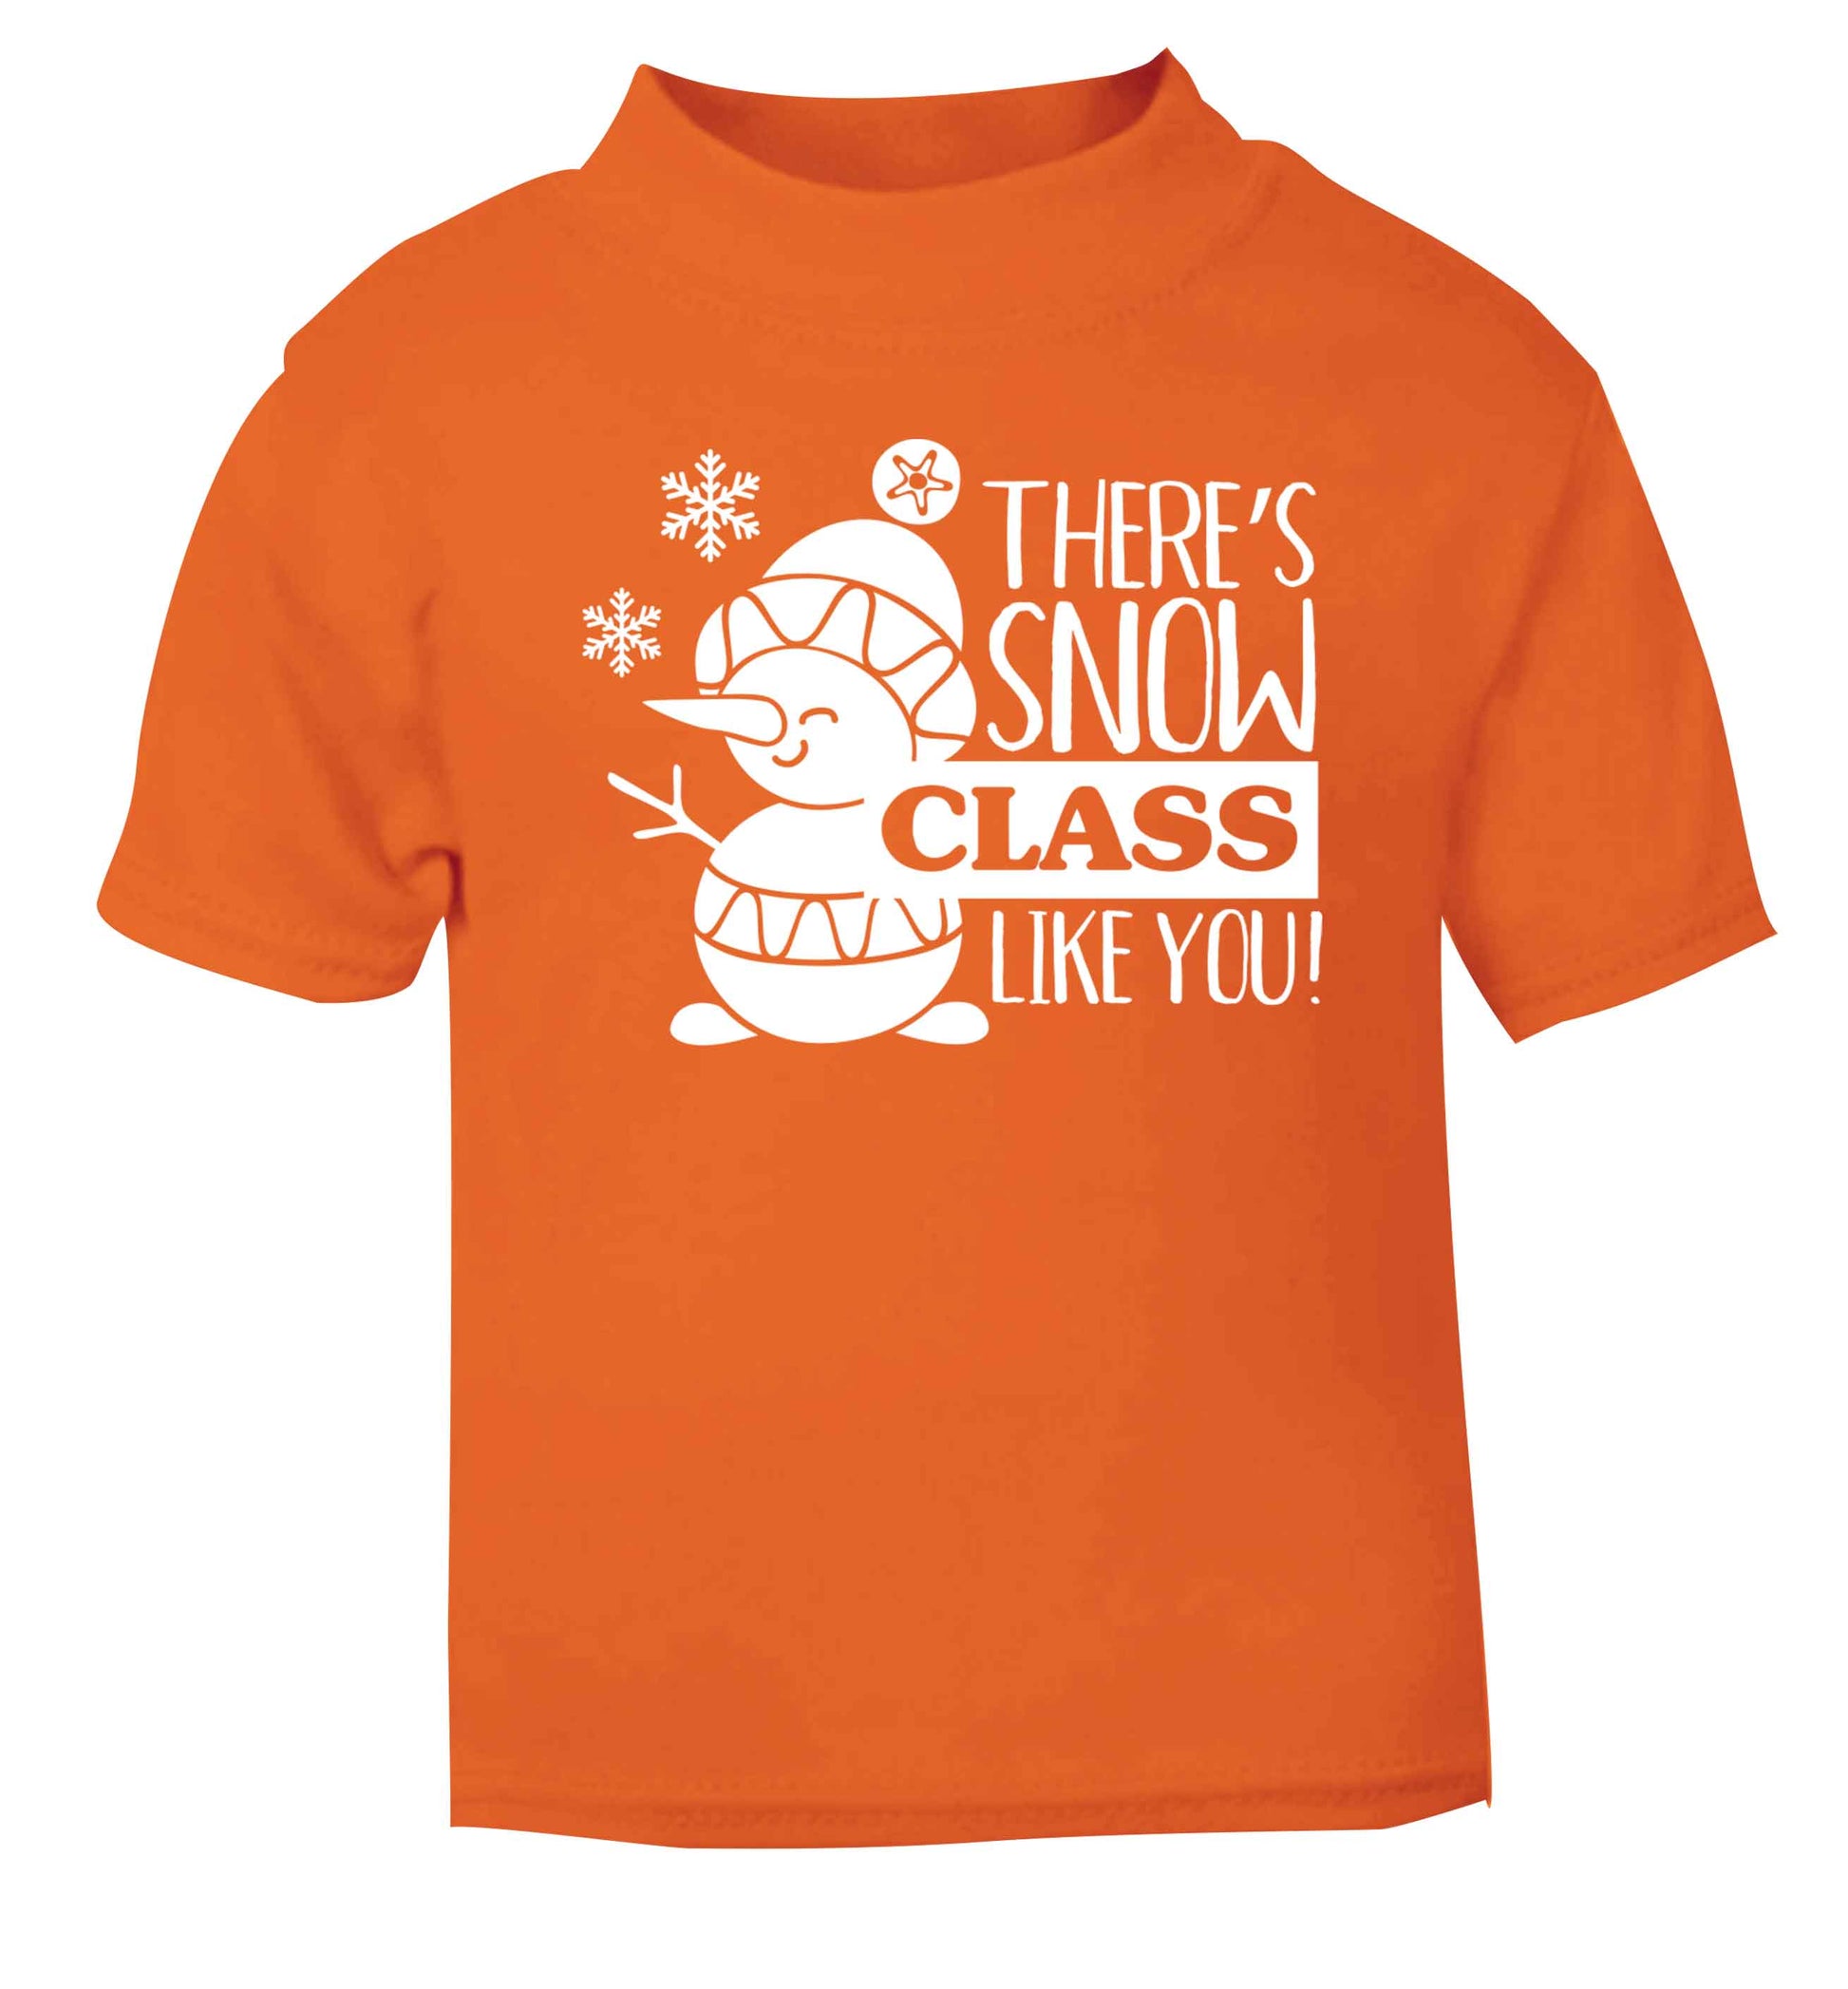 There's snow class like you orange baby toddler Tshirt 2 Years